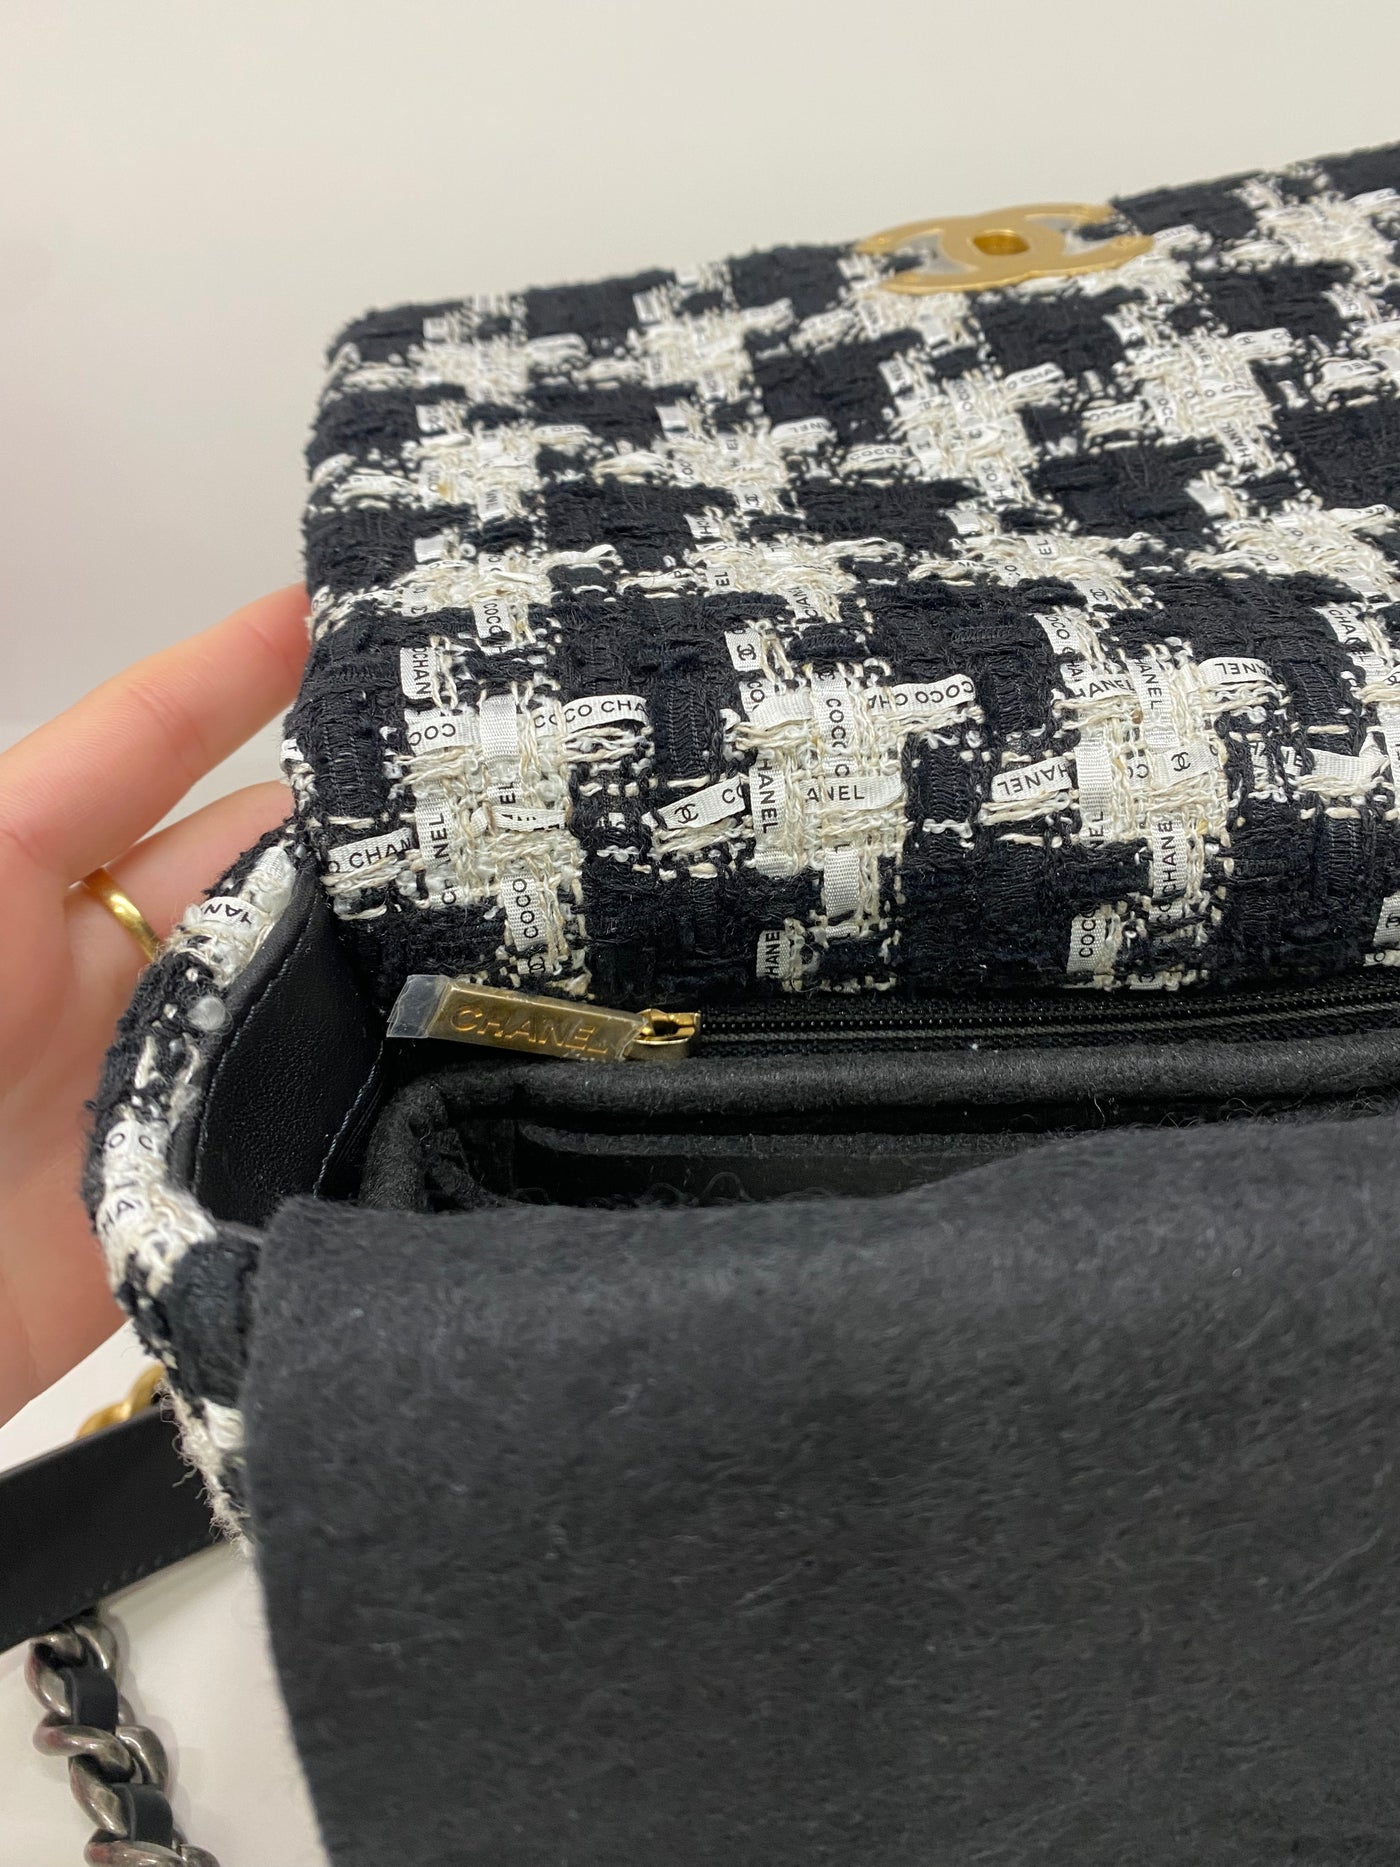 Chanel 19 bag small - Tweed houndstooth